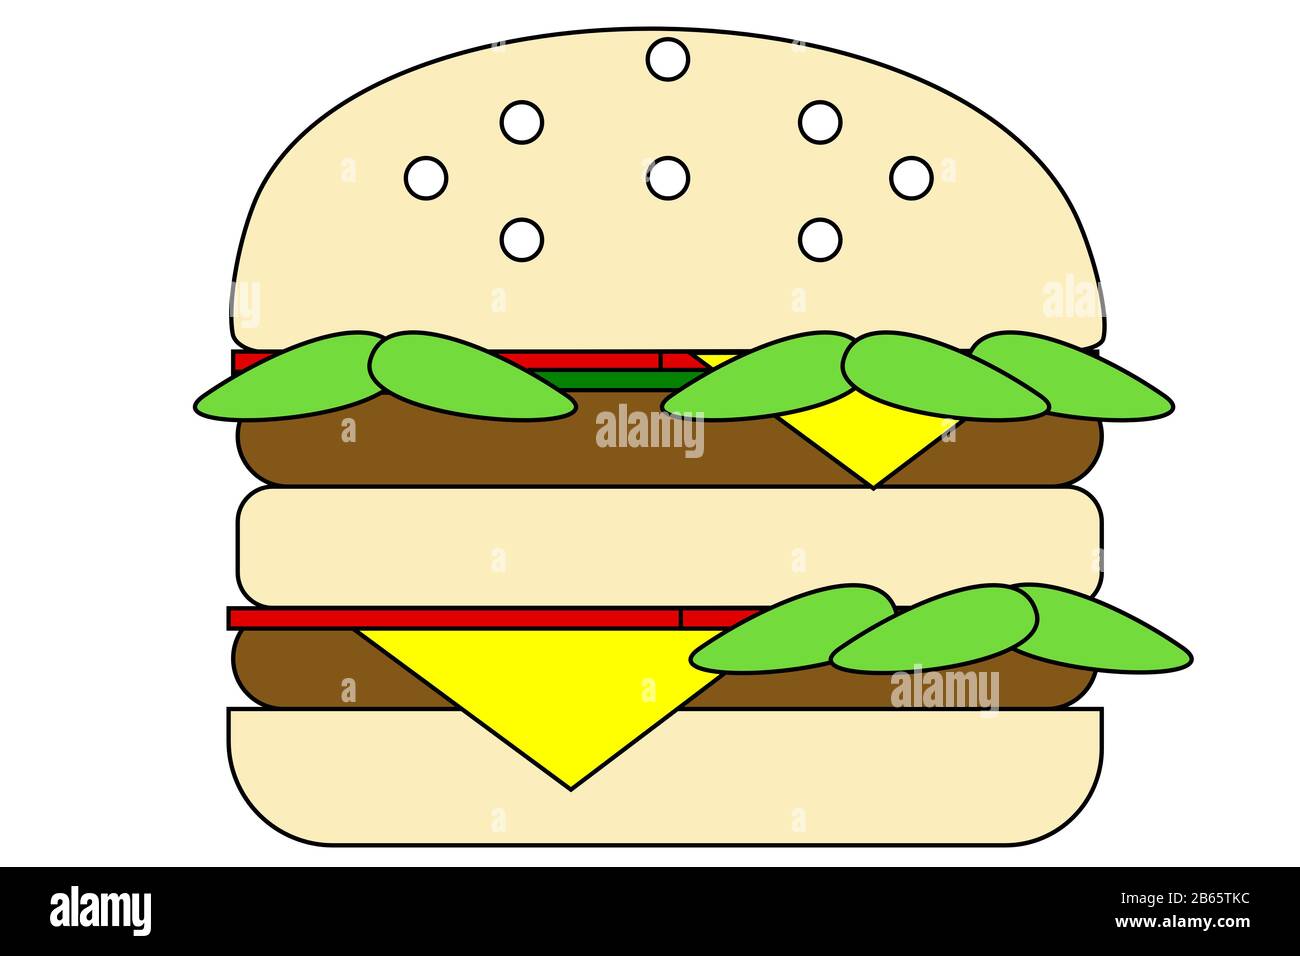 Big colorful burger cartoon isolated on white background. Two layers of  hamburger meat with cheese, salad, tomatoes, and gherkins Stock Photo -  Alamy